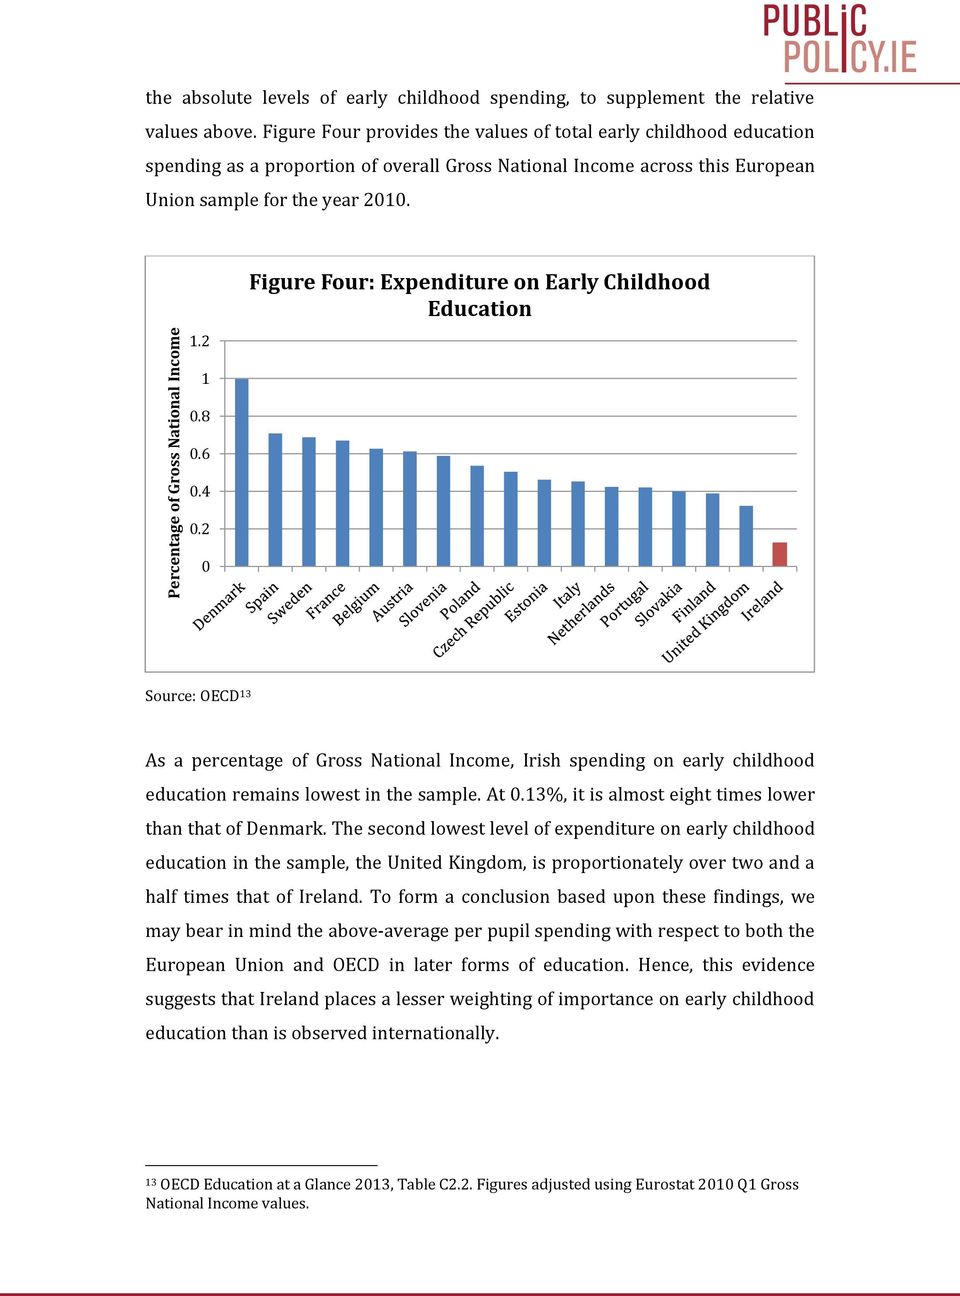 2 Figure Four: Expenditure on Early Childhood Education 1.8.6.4.2 Source: OECD 13 As a percentage of Gross National Income, Irish spending on early childhood education remains lowest in the sample.